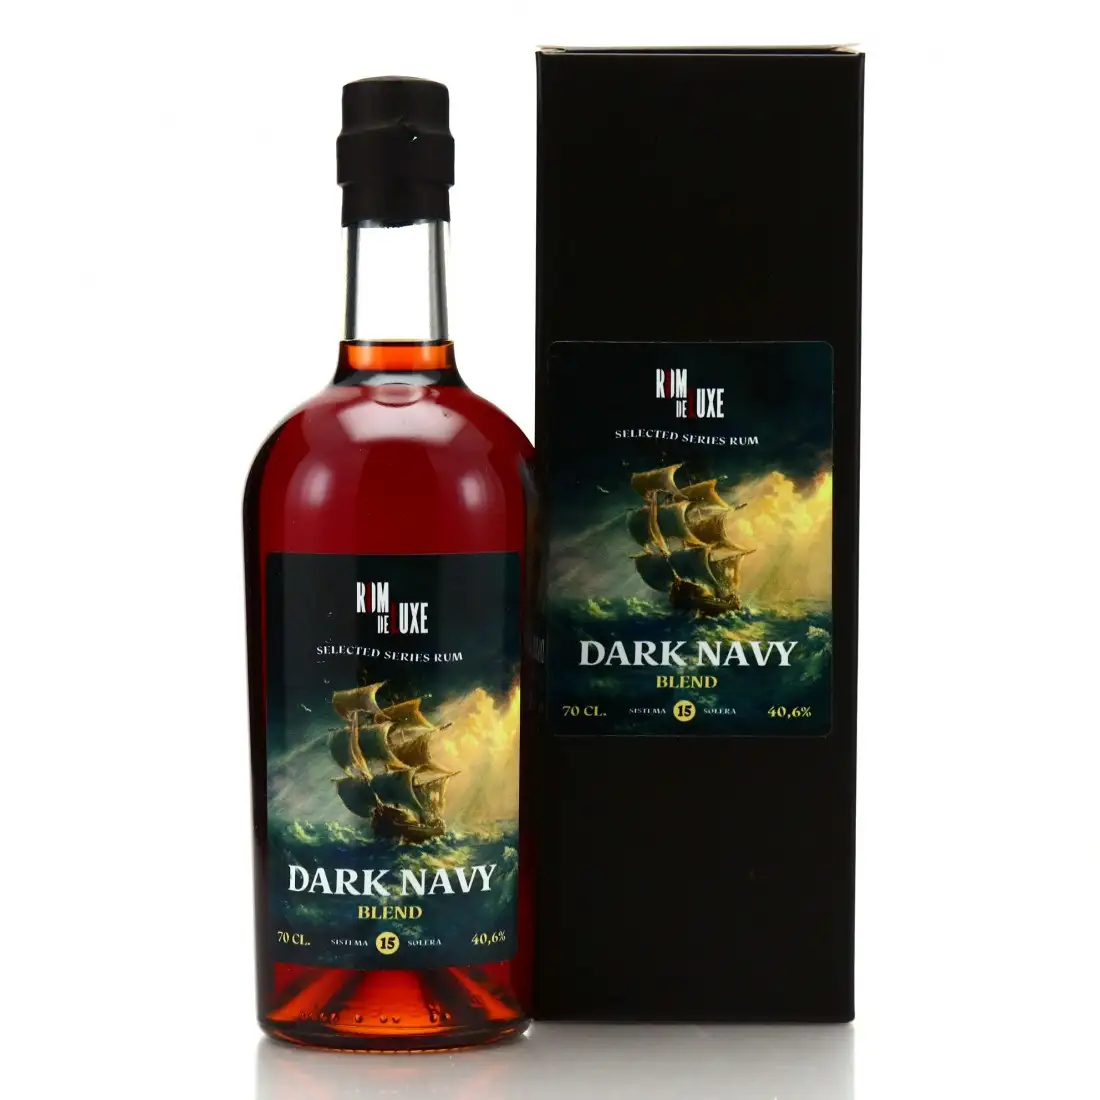 Image of the front of the bottle of the rum Dark Navy Blend Selected Series Rum No.3